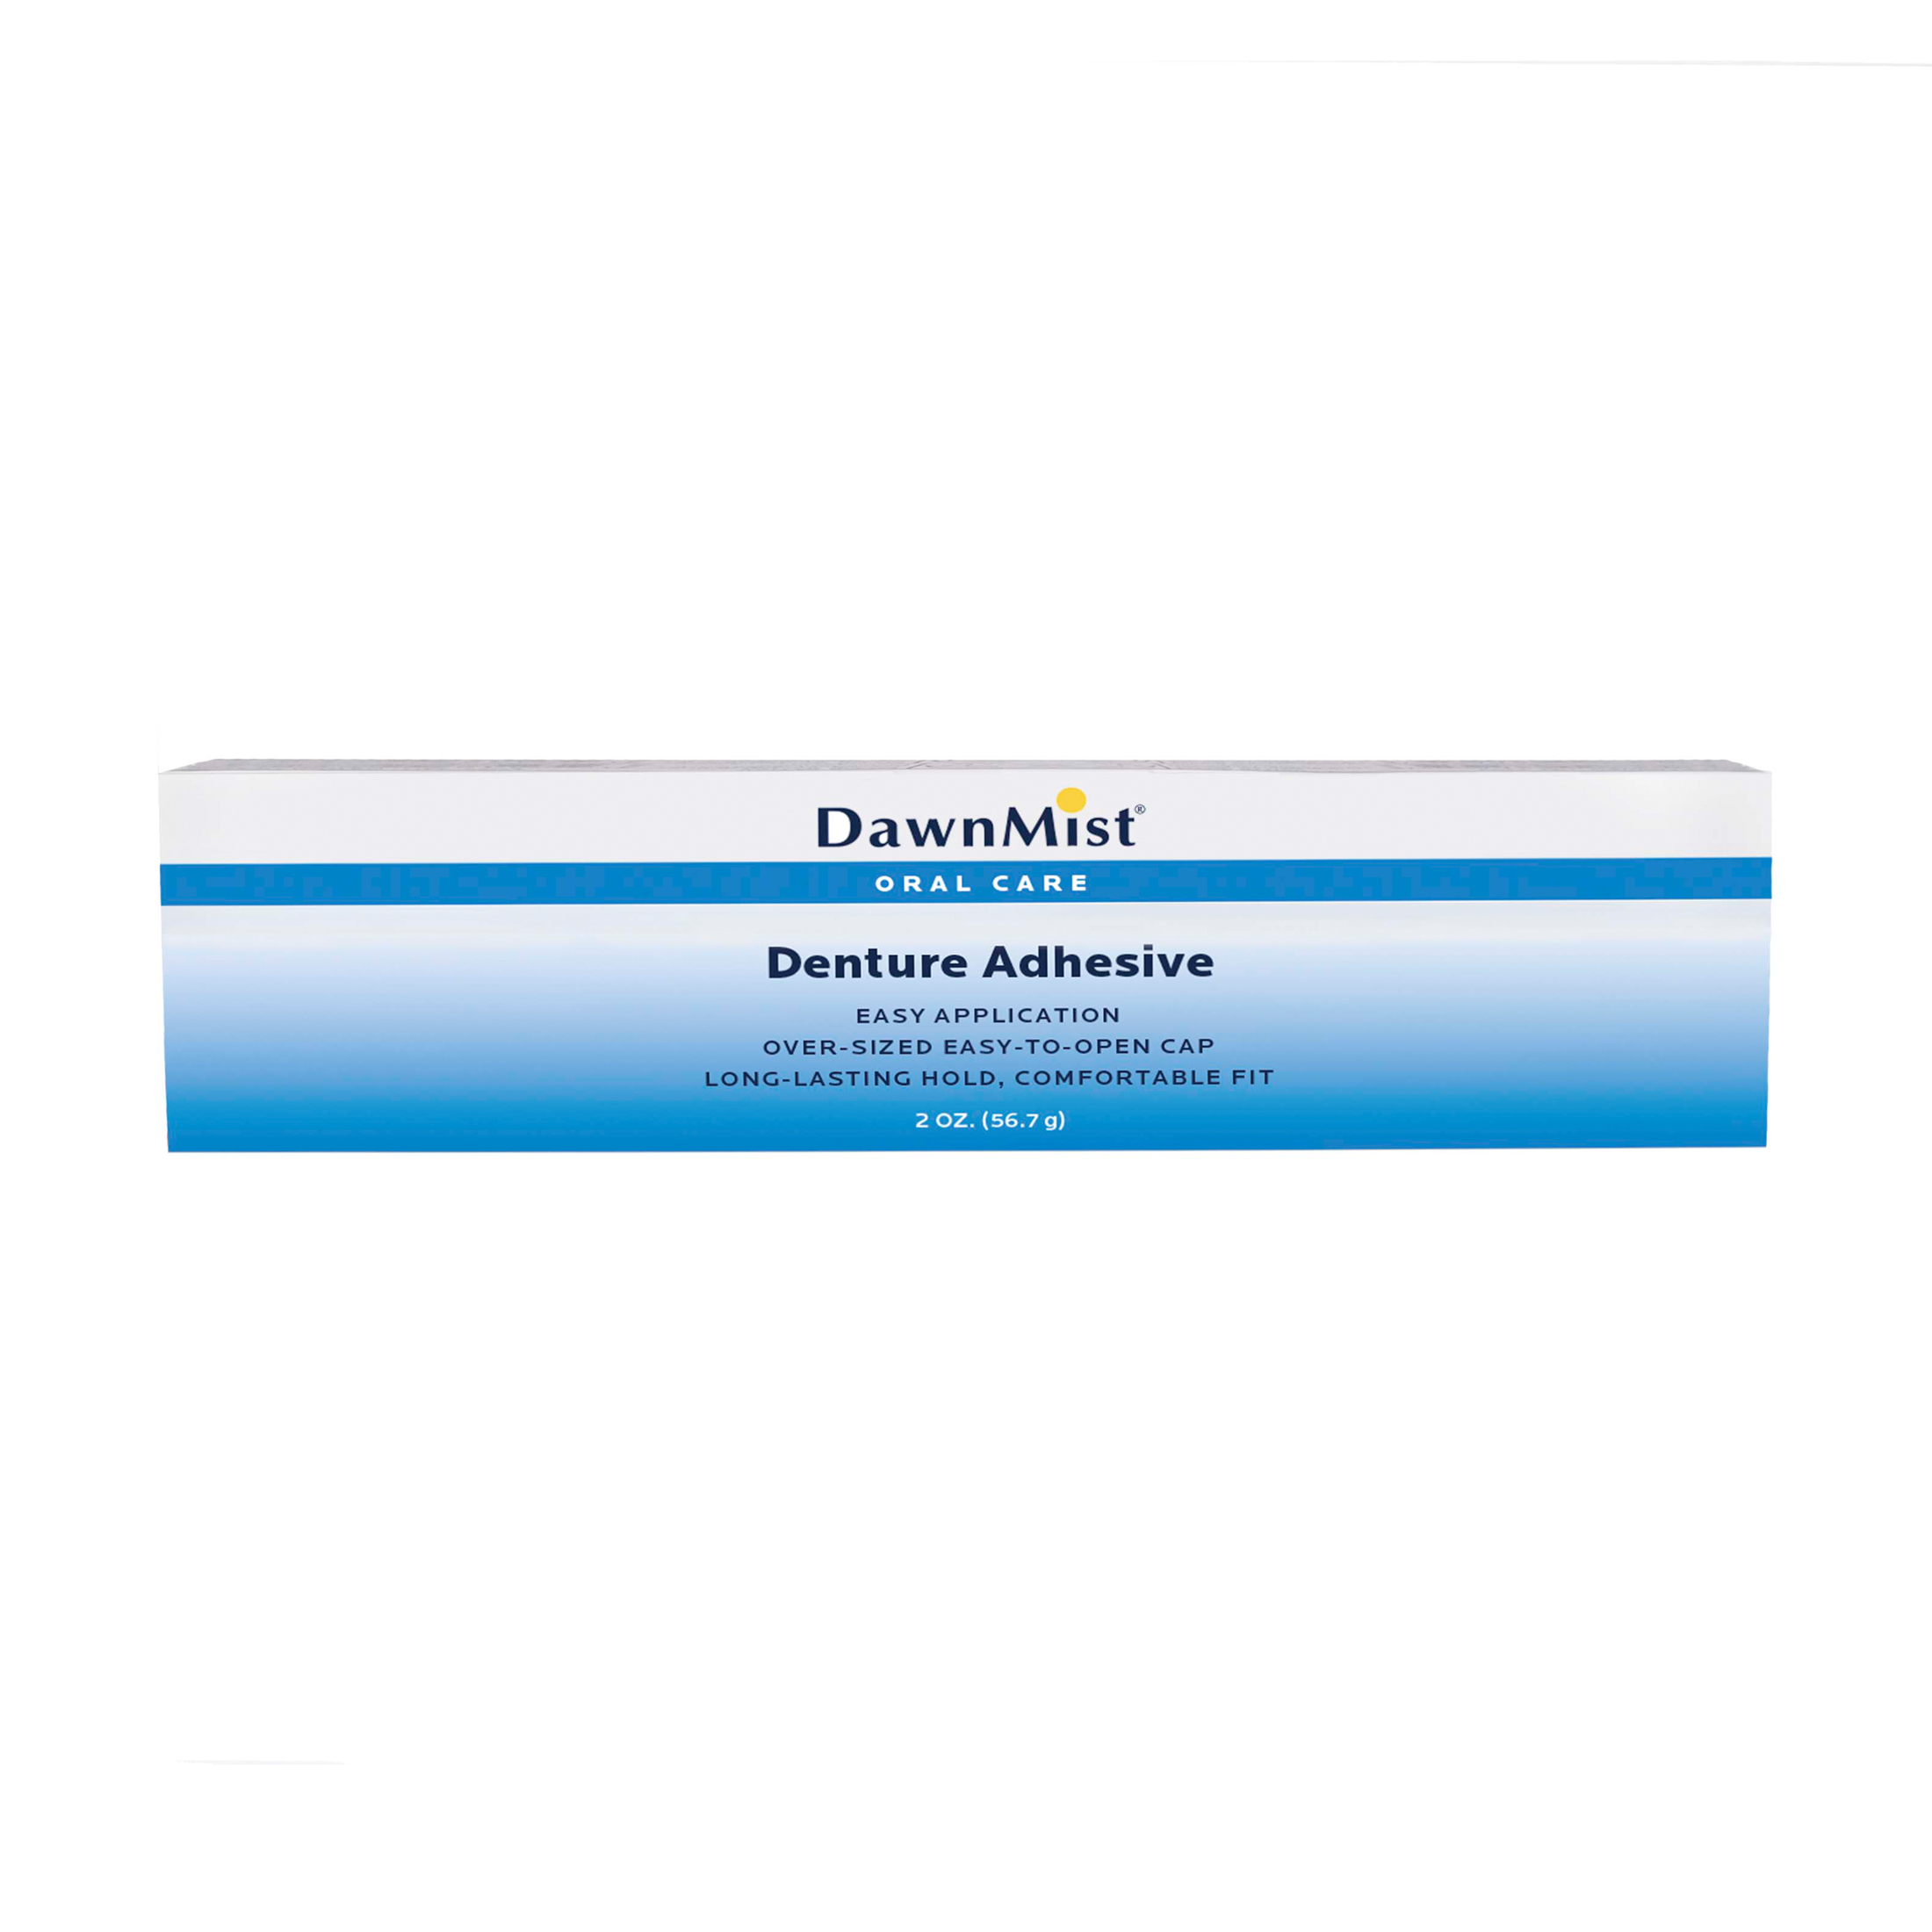 Denture Adhesive Products, Supplies and Equipment